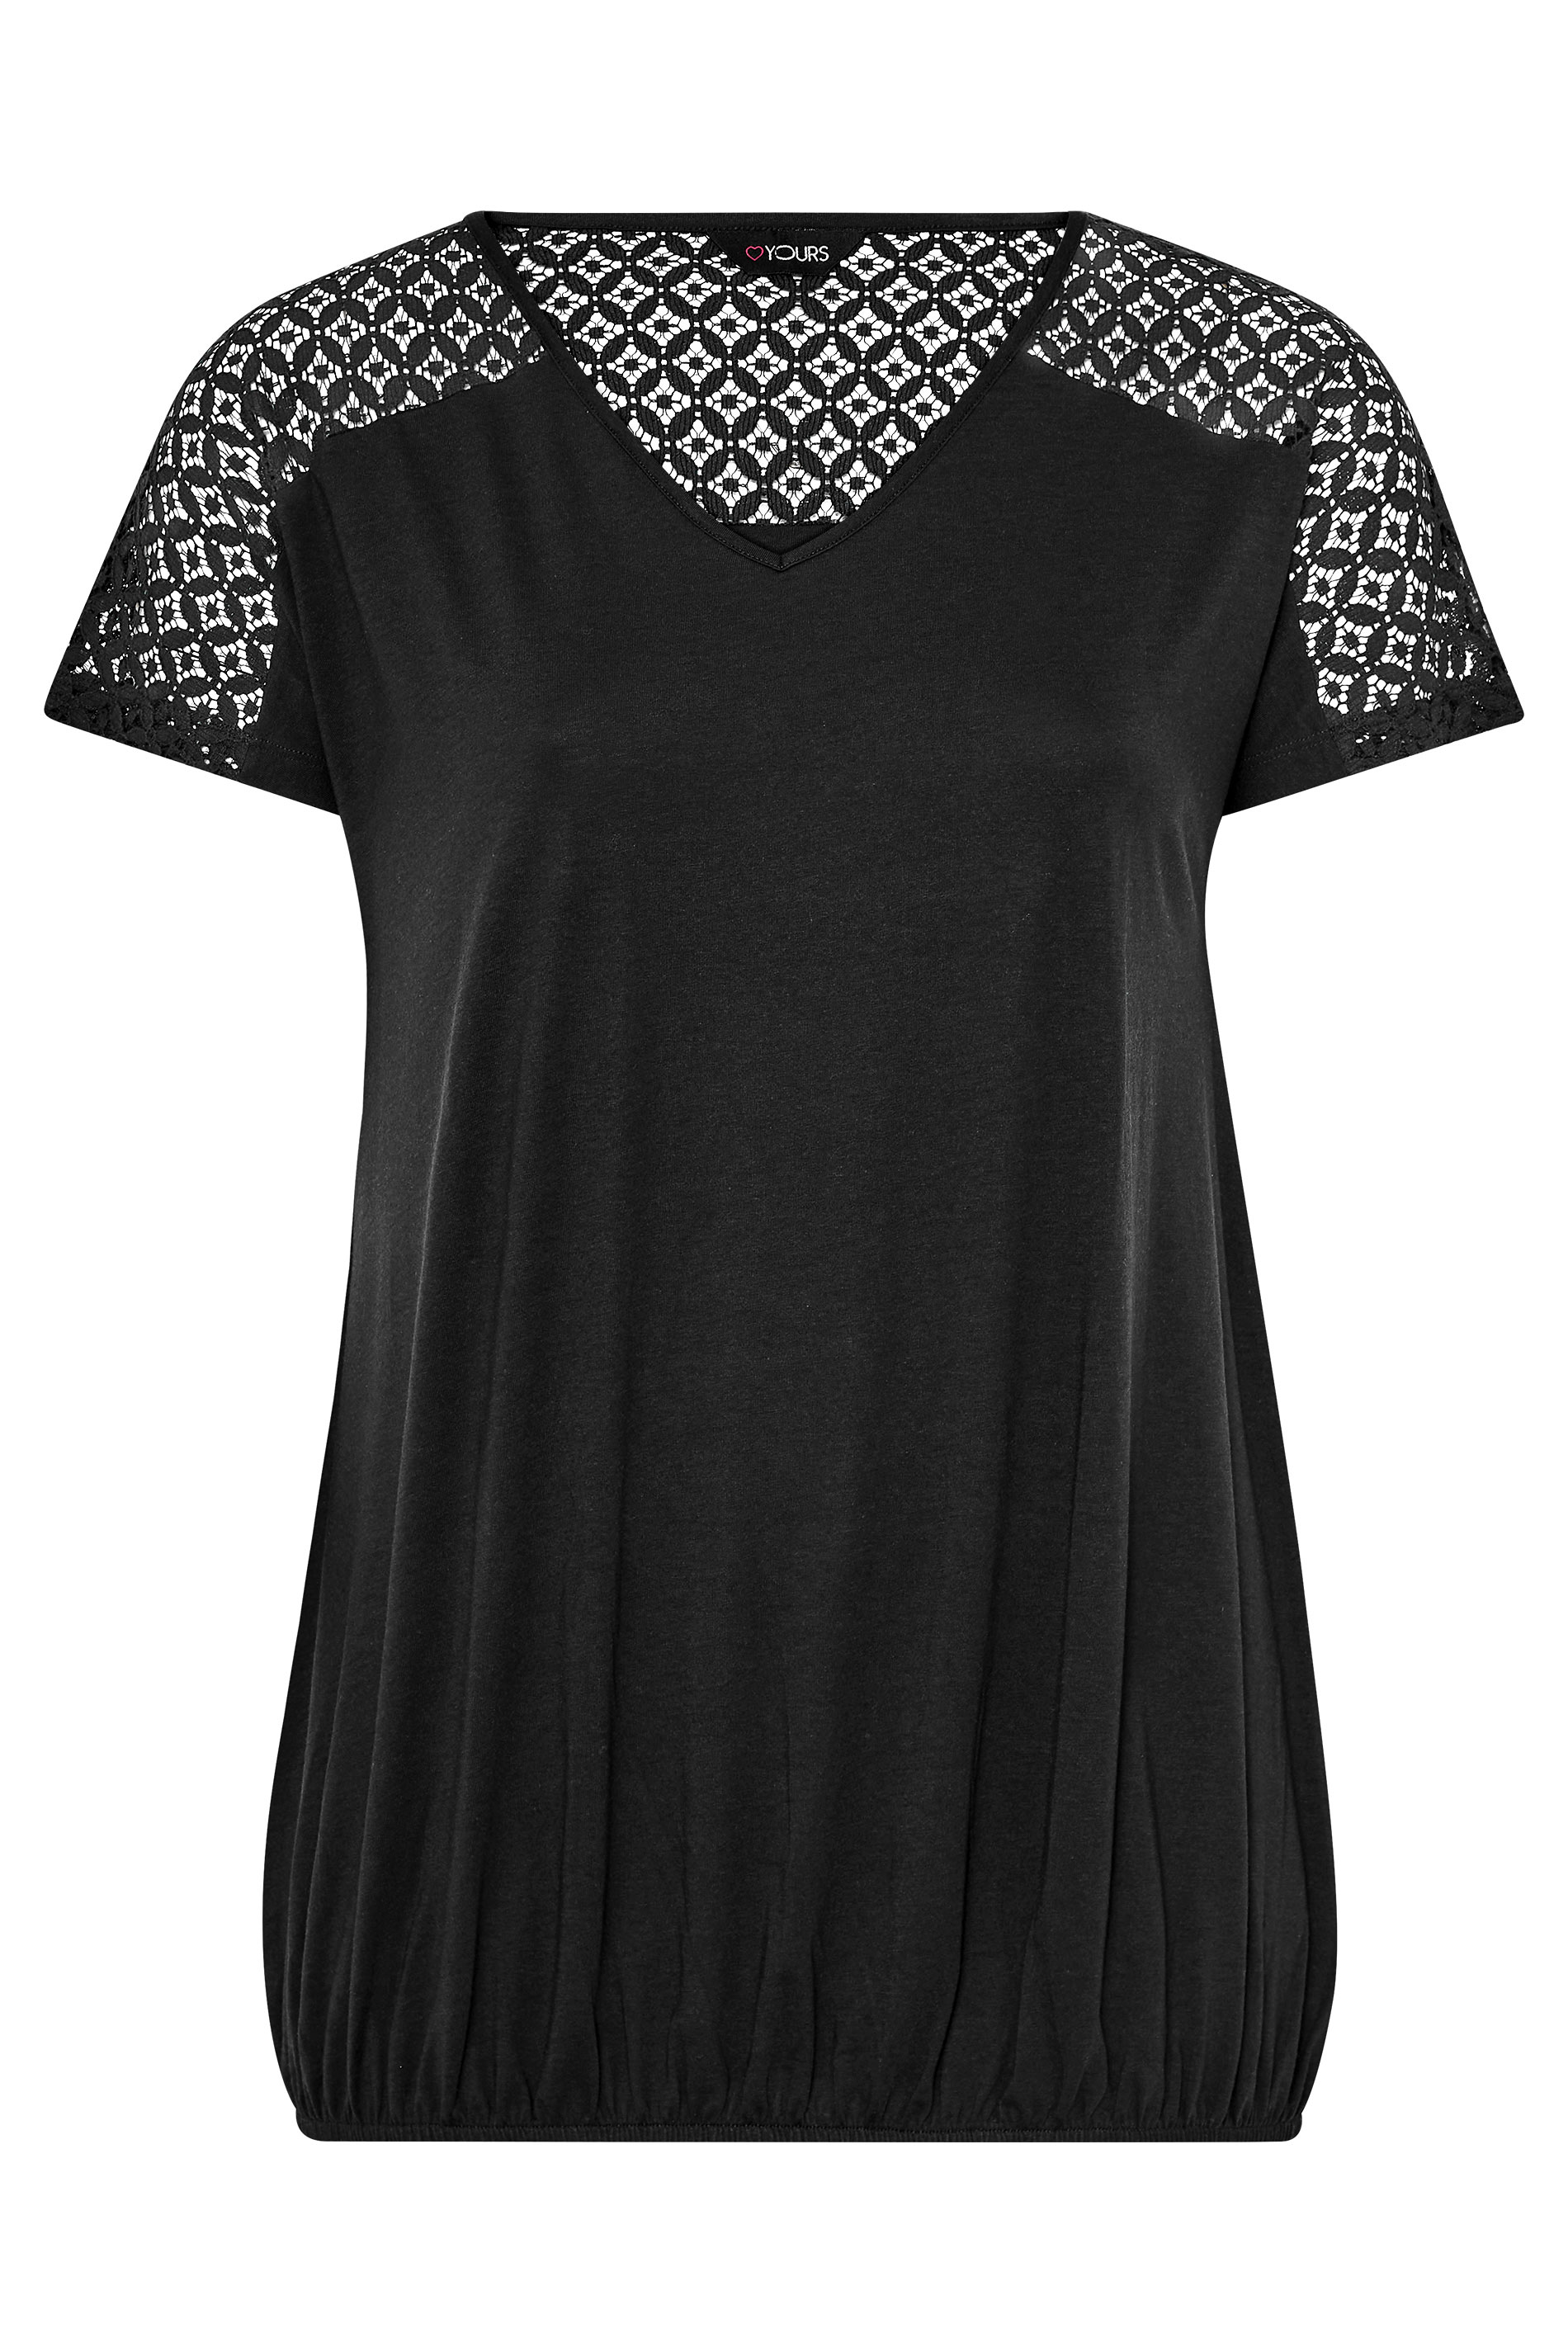 Black Lace Sleeve Bubble Hem Top | Yours Clothing